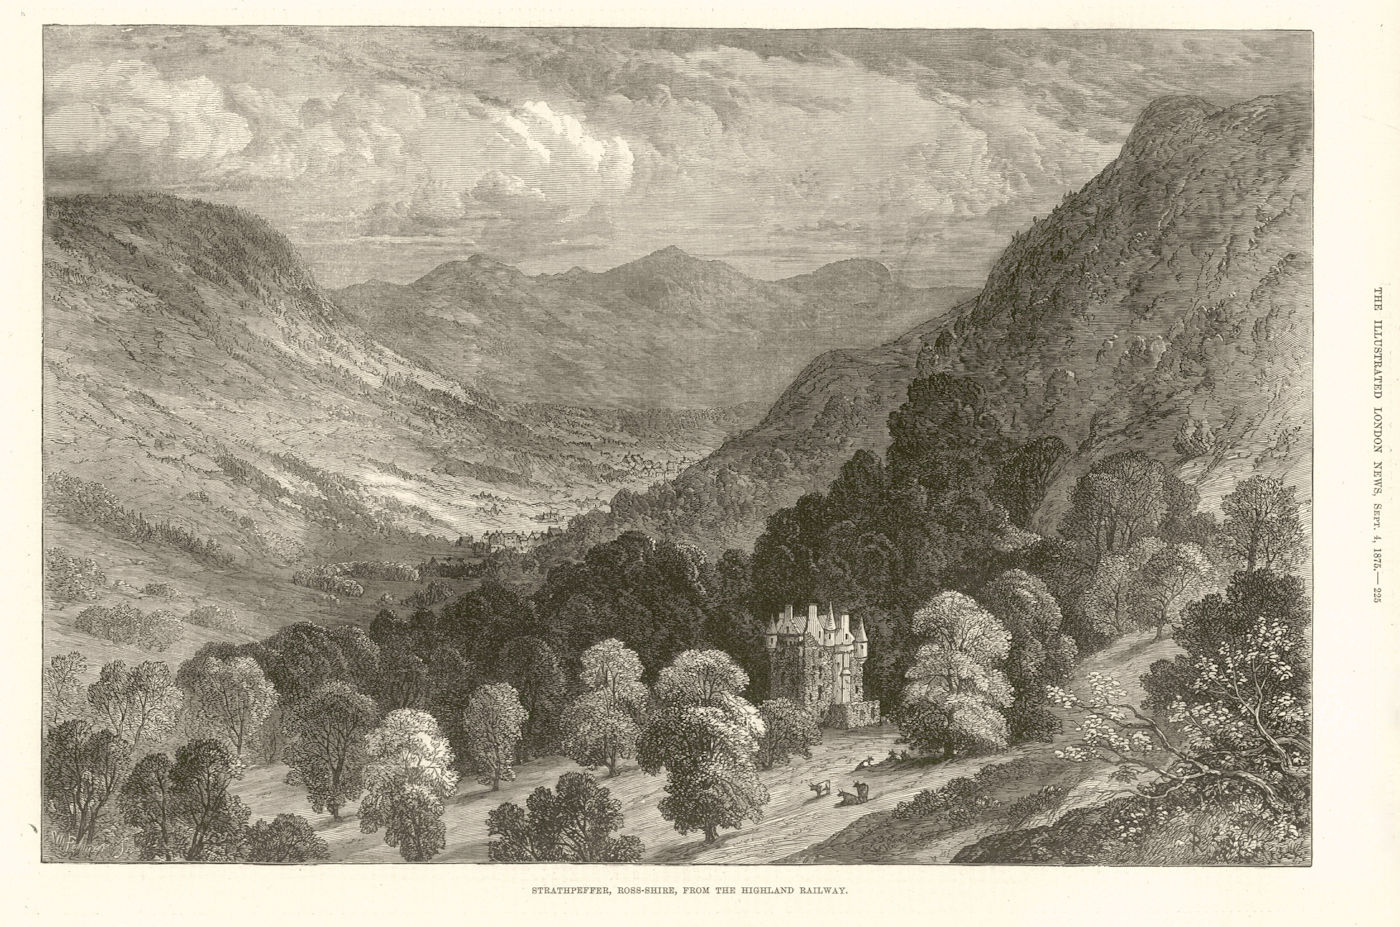 Associate Product Strathpeffer, Ross-Shire, from the Highland Railway. Scotland 1875 old print